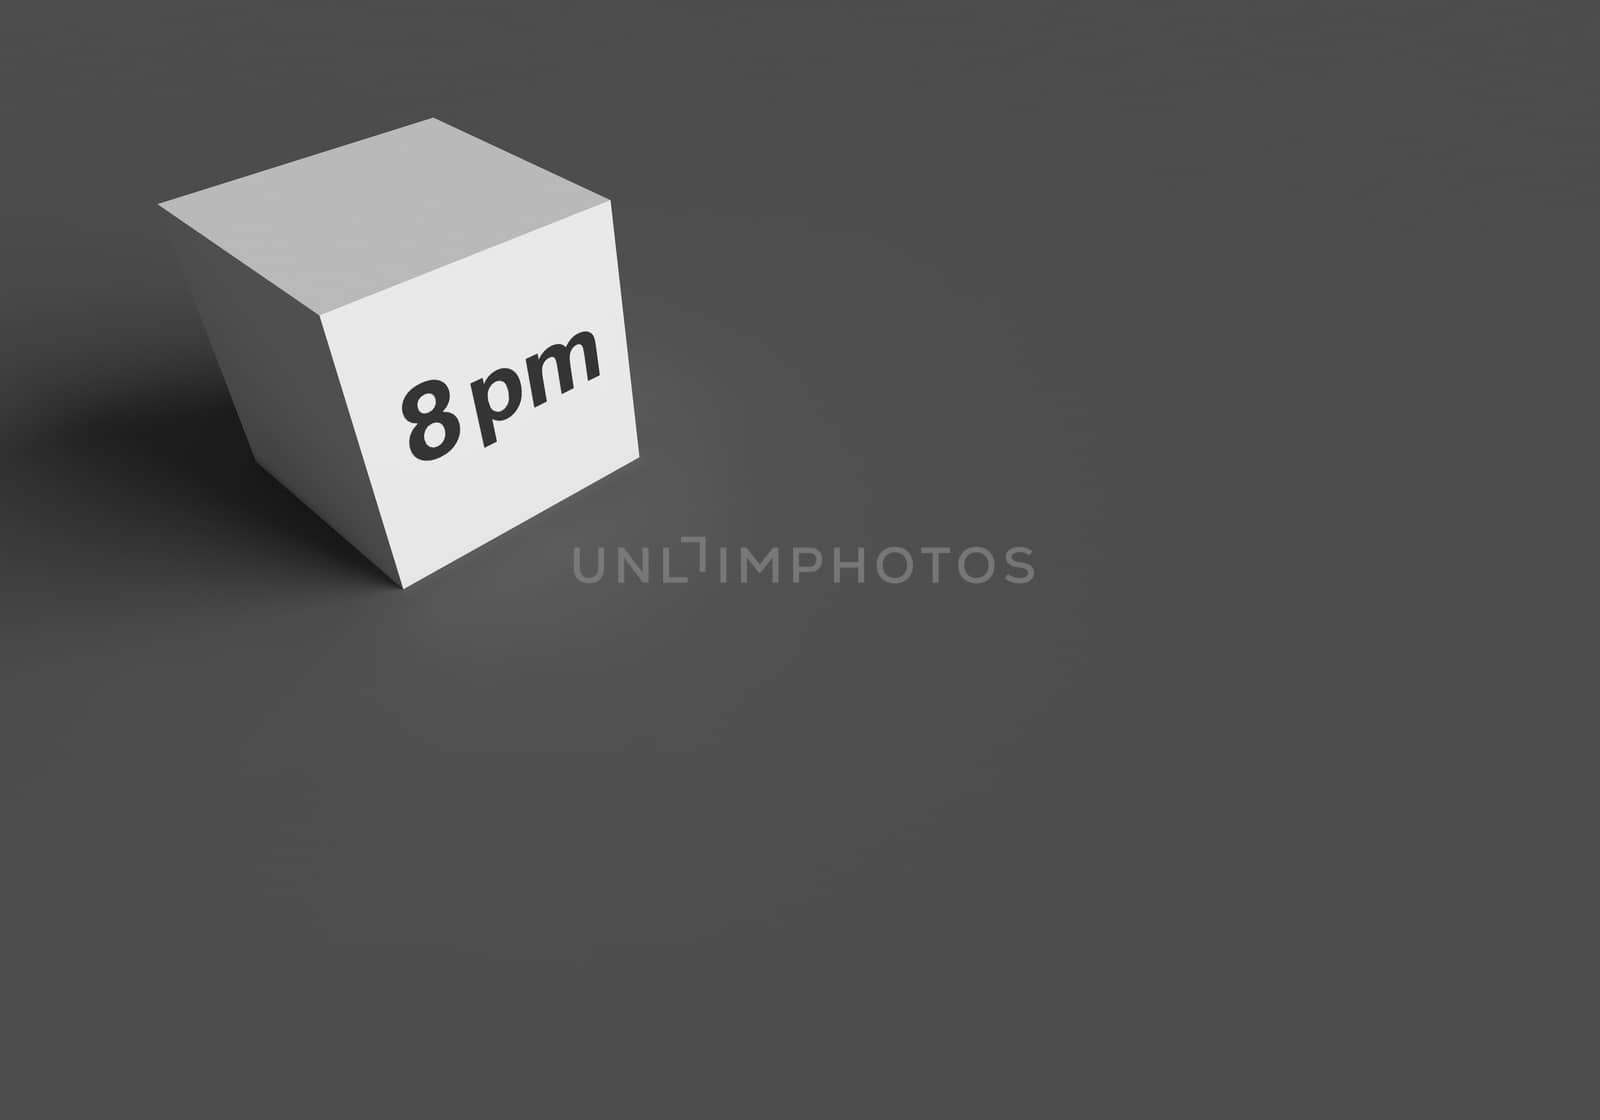 3D RENDERING WORDS 8 pm ON WHITE CUBE, STOCK PHOTO